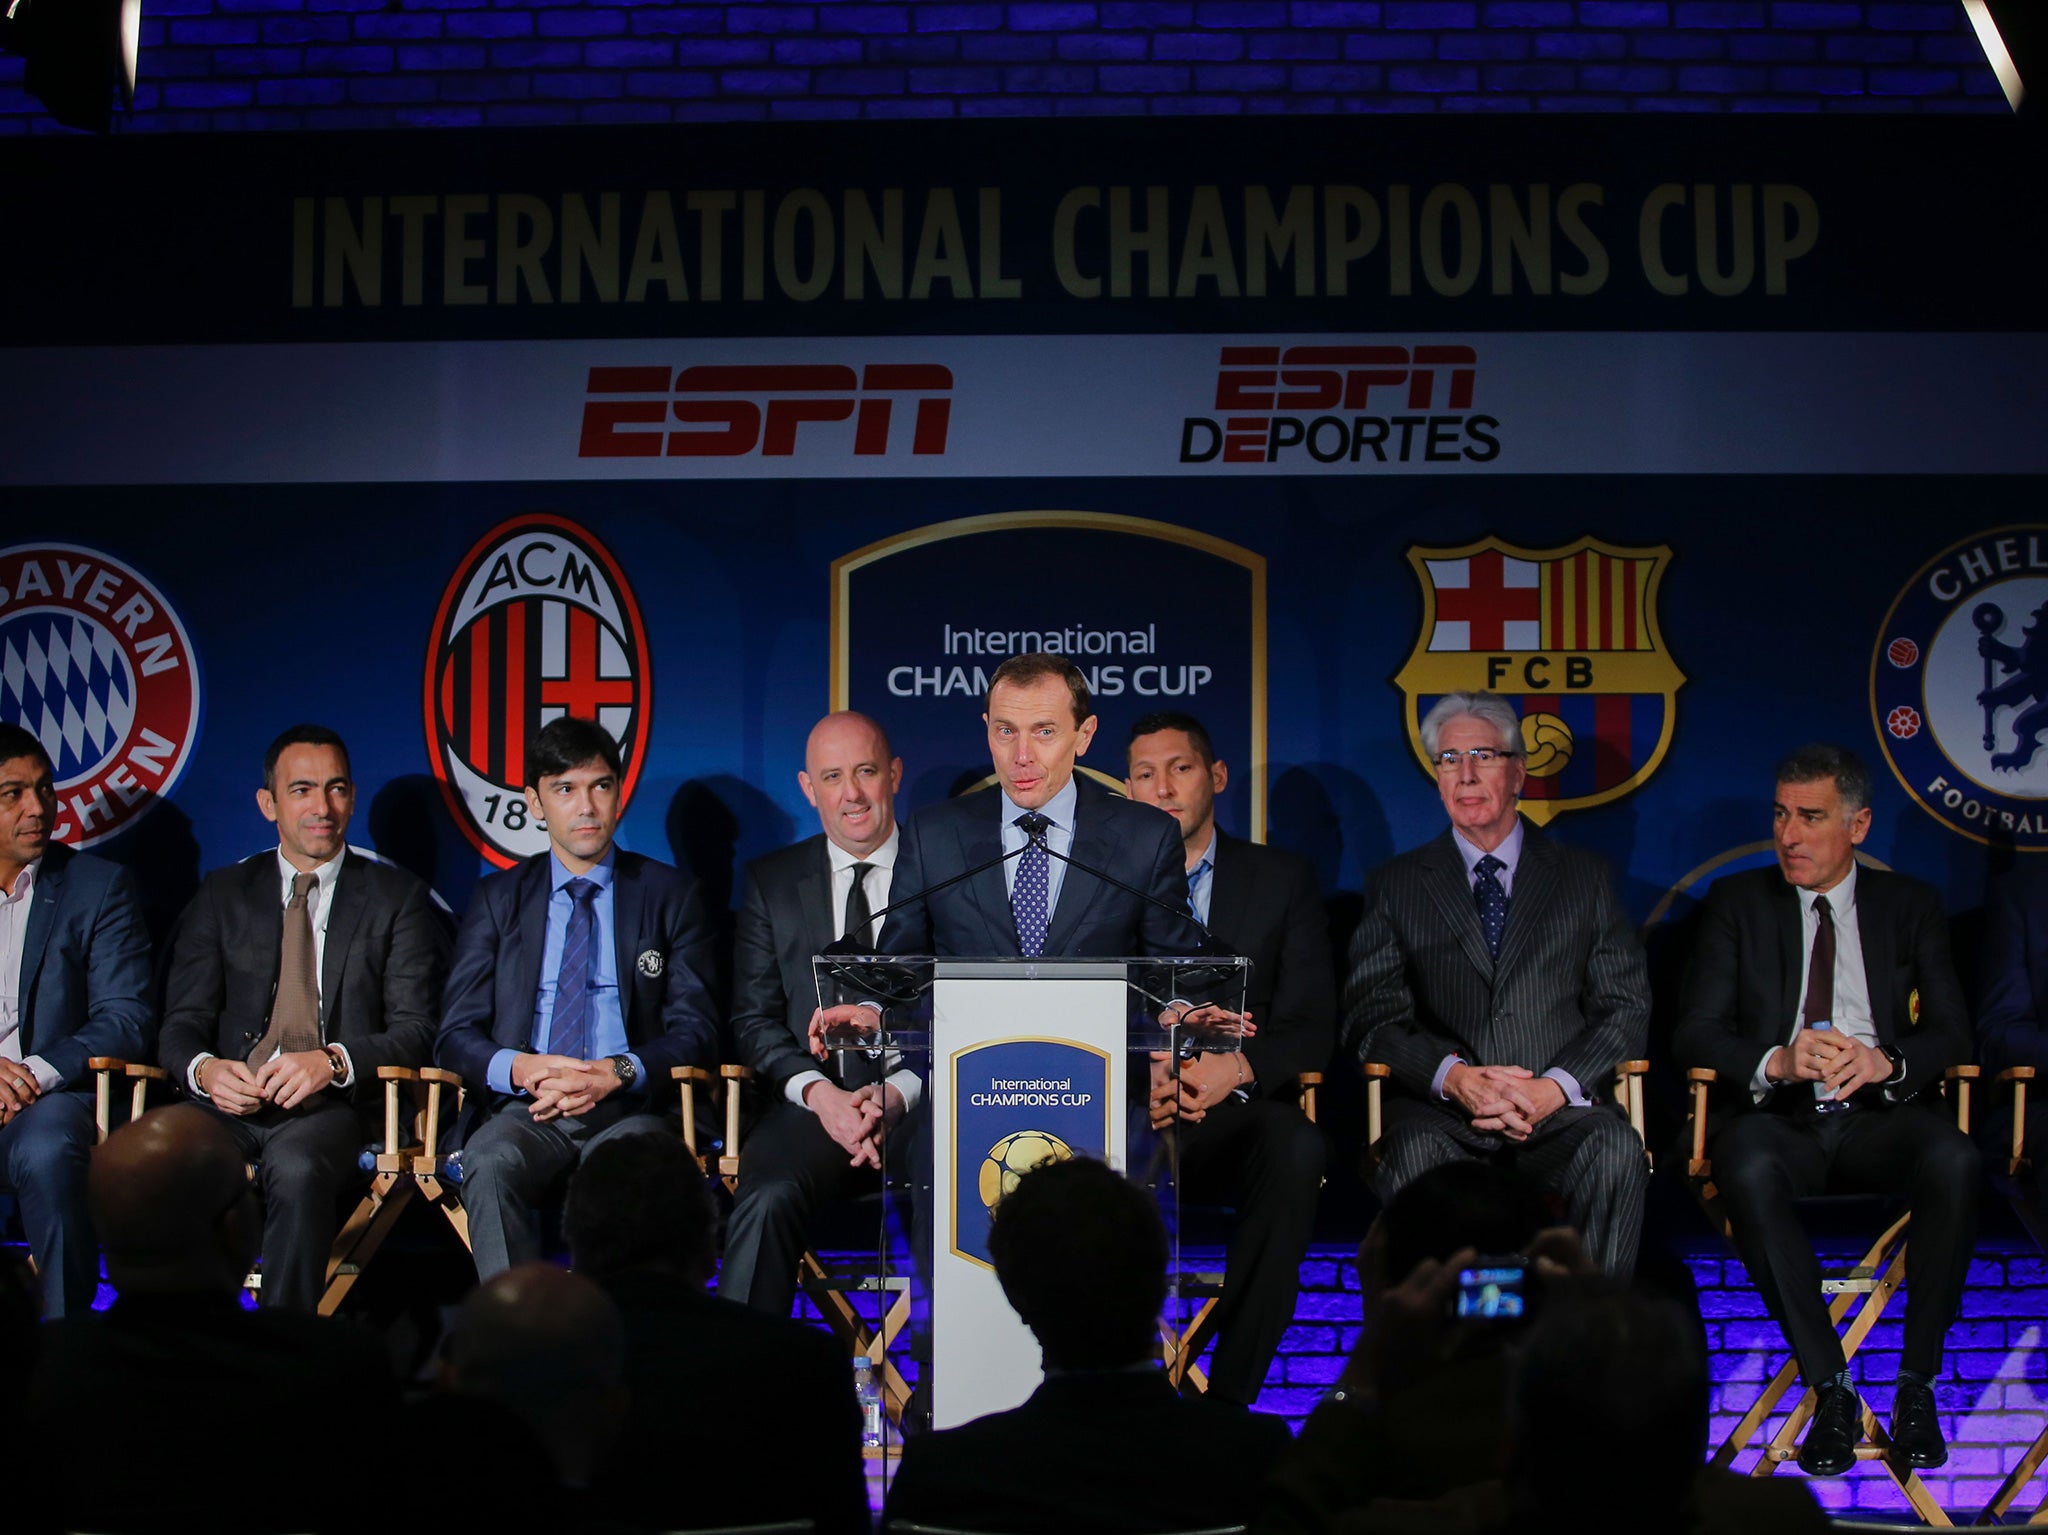 Real Madrid's Emilio Butragueno speaks during a press conference to announce the ICC 2016 teams